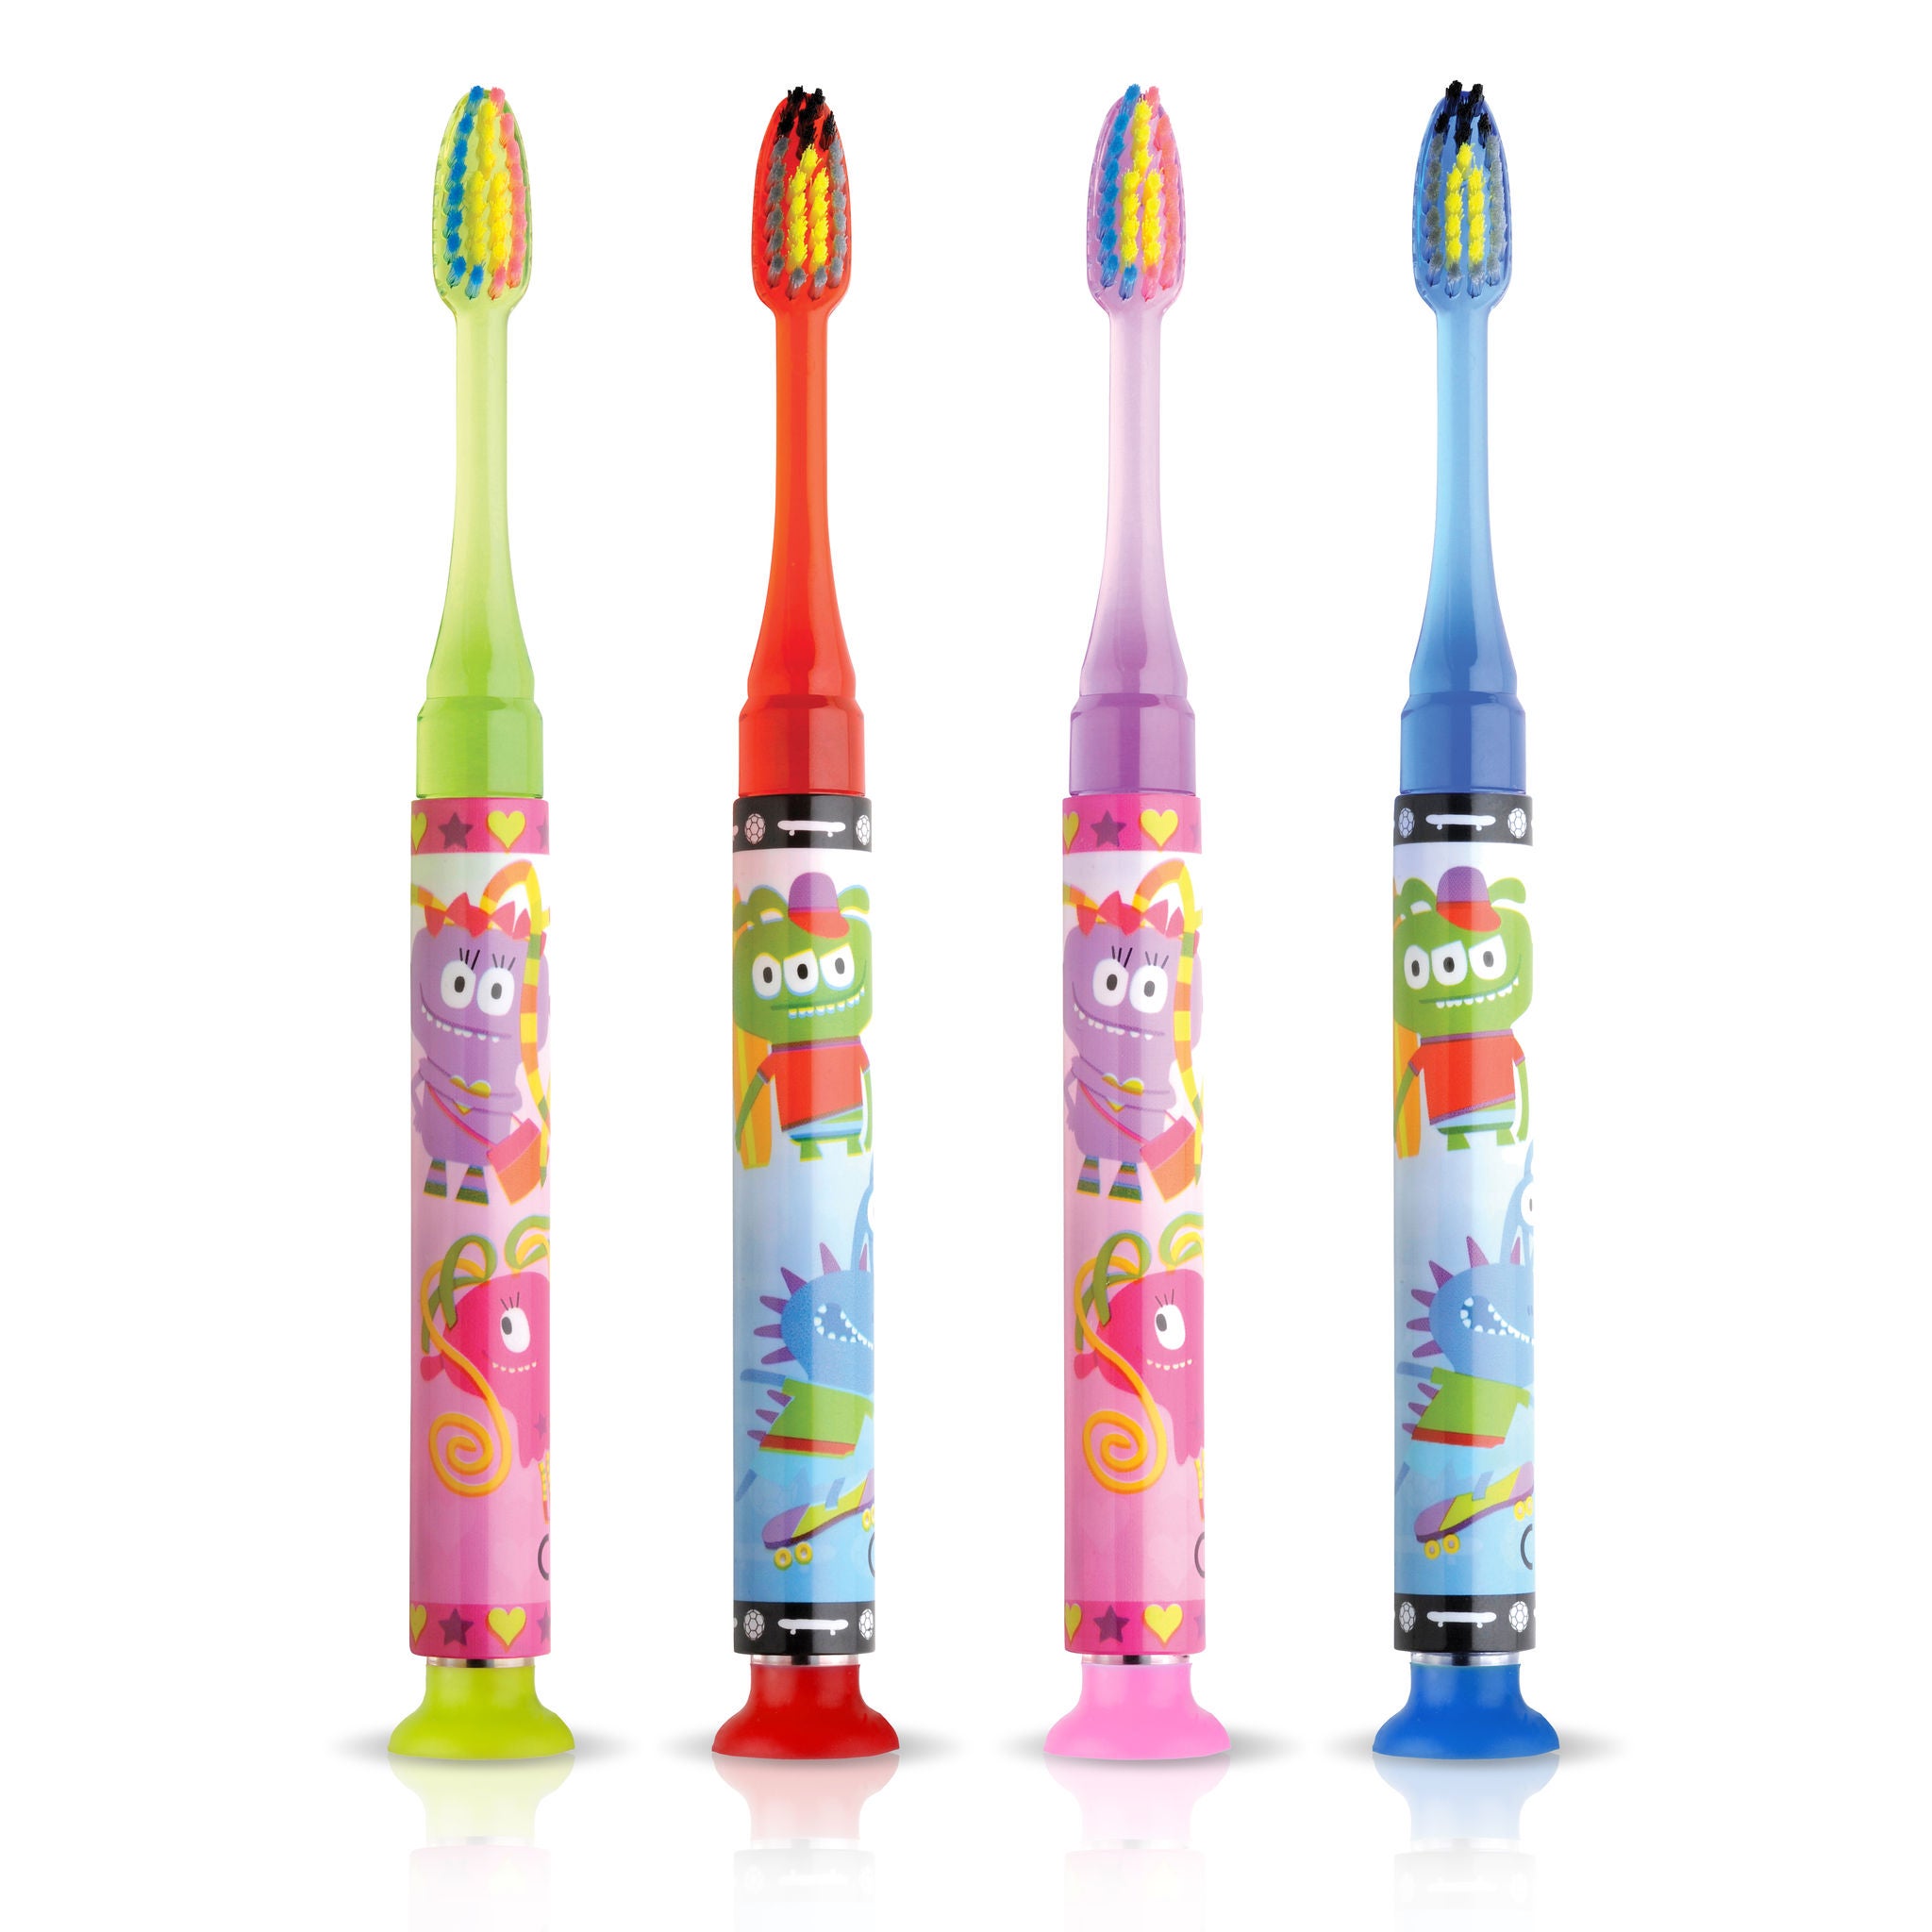 903-Product-Toothbrush-Lightup-Monsterz-naked-4colors.jpg